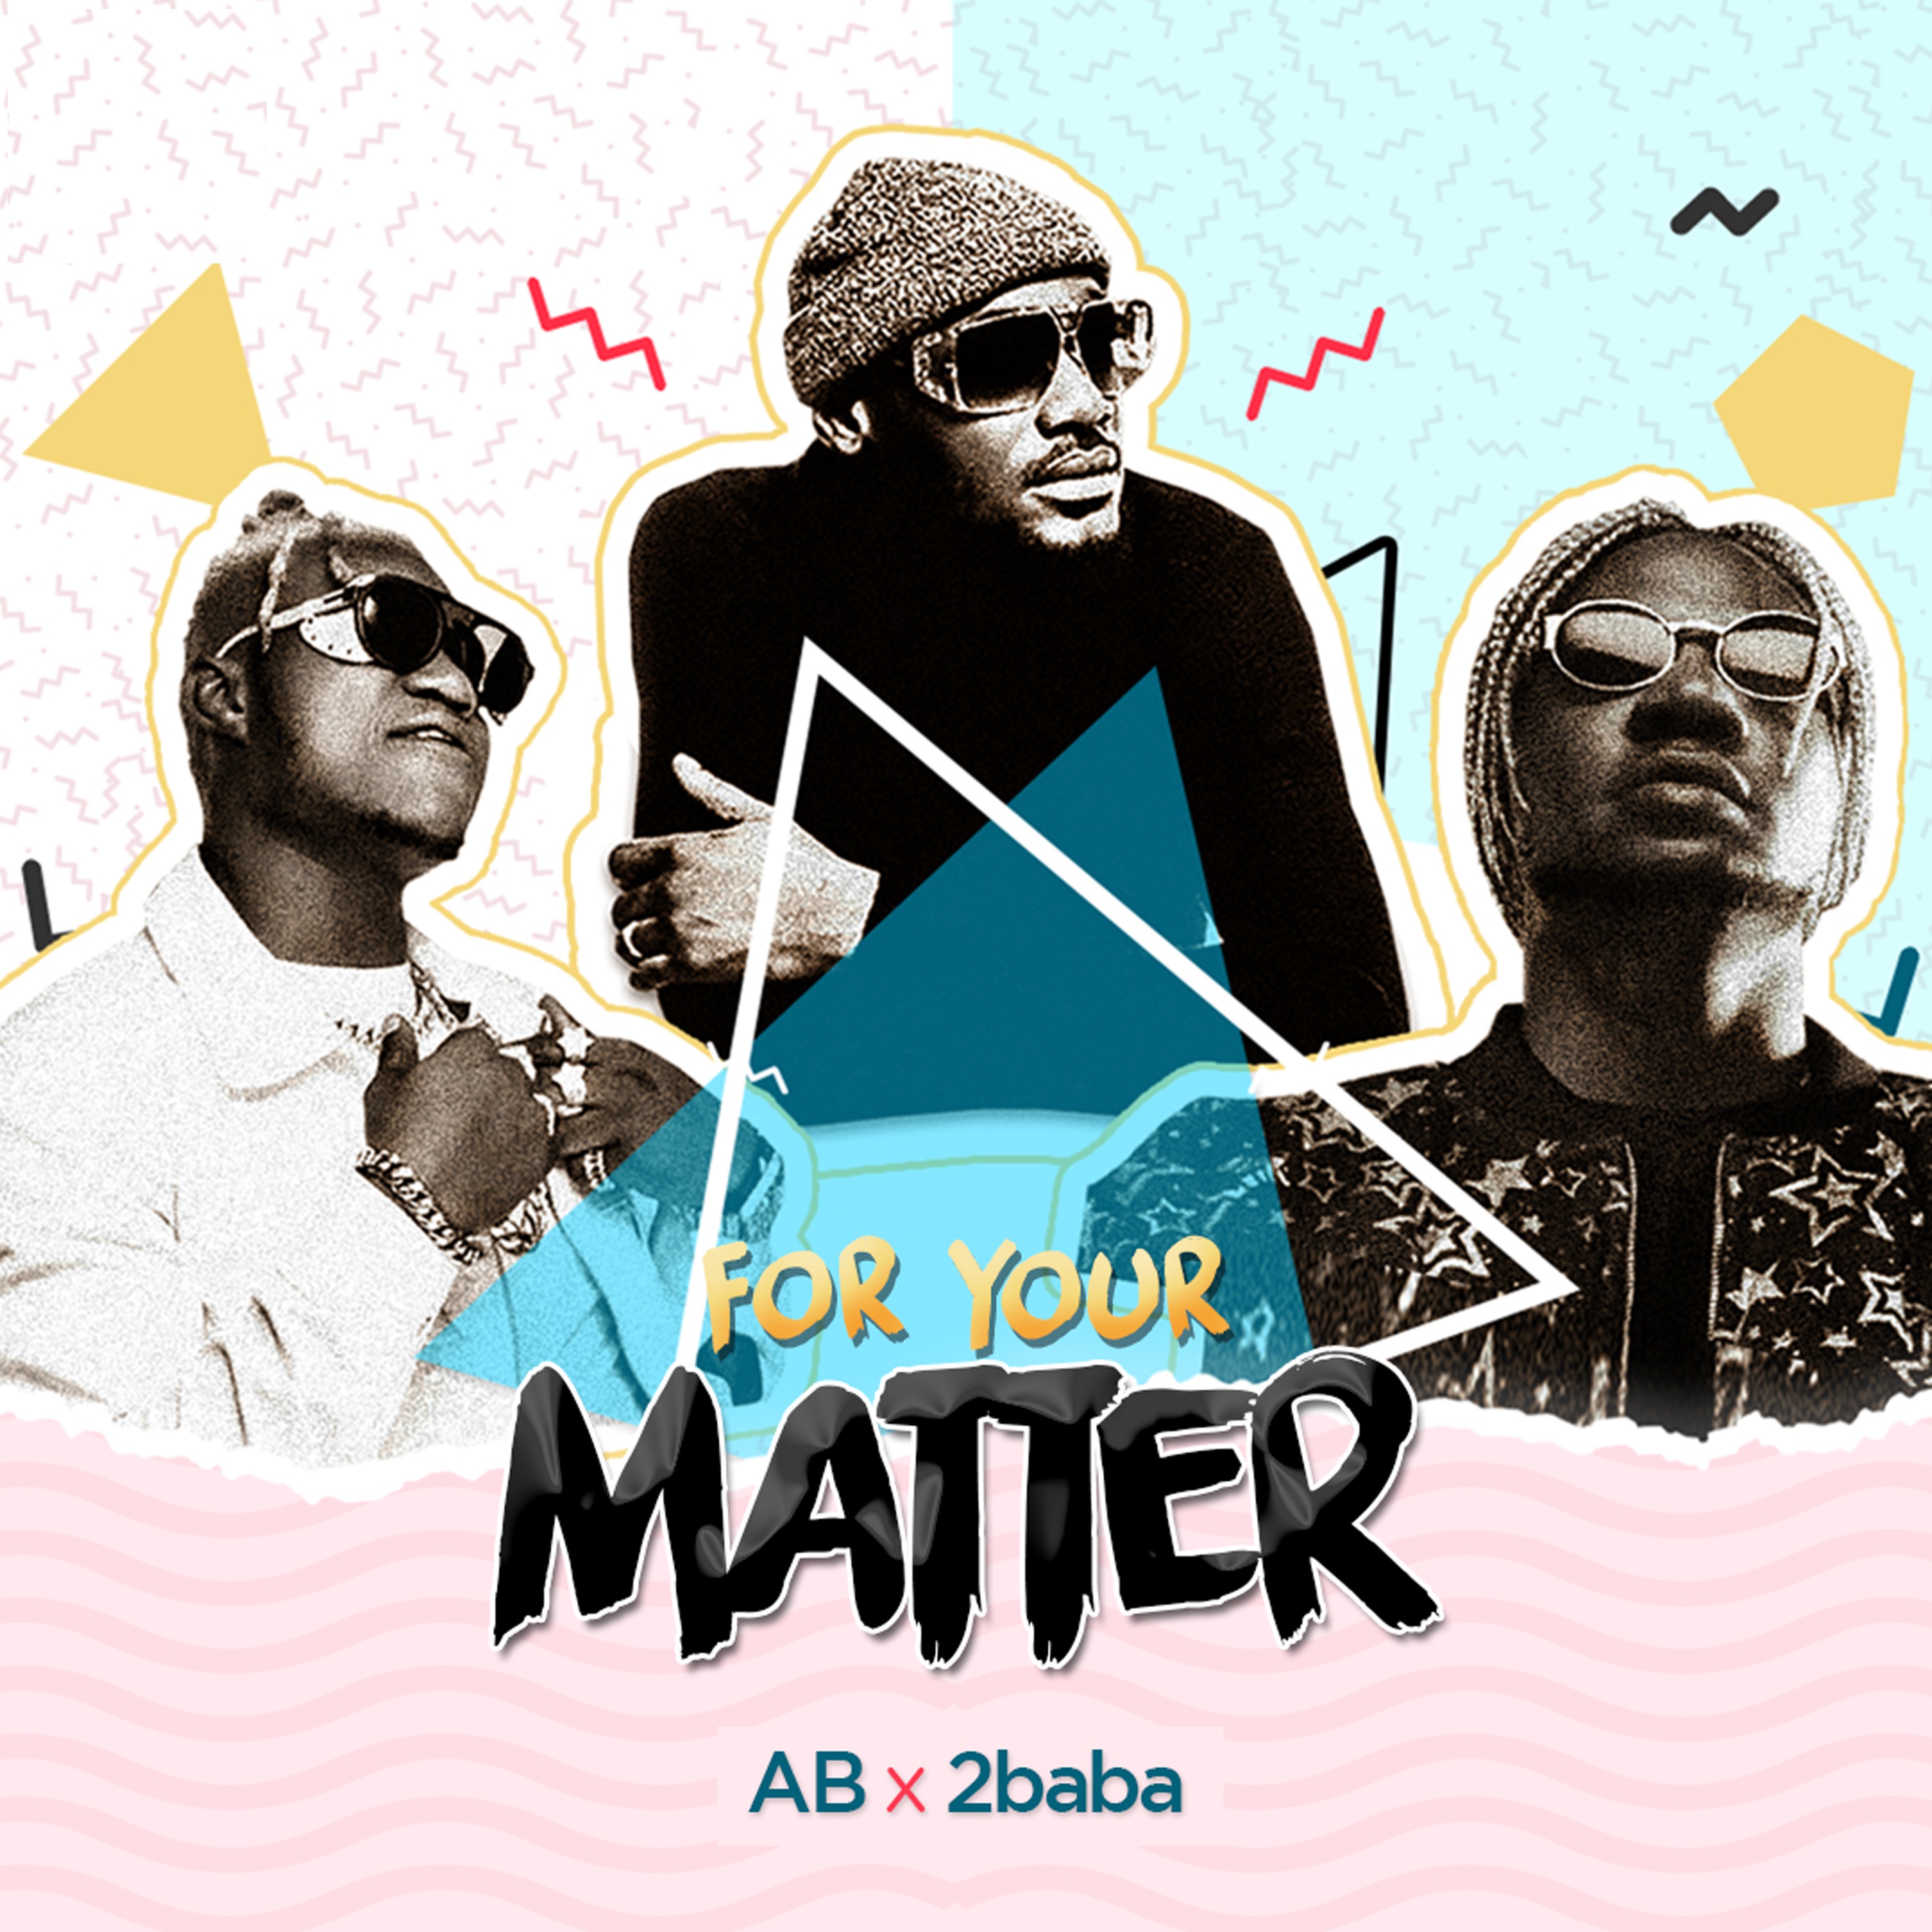 VIDEO: AB (Apex And Bionic) ft. 2Baba – For Your Matter